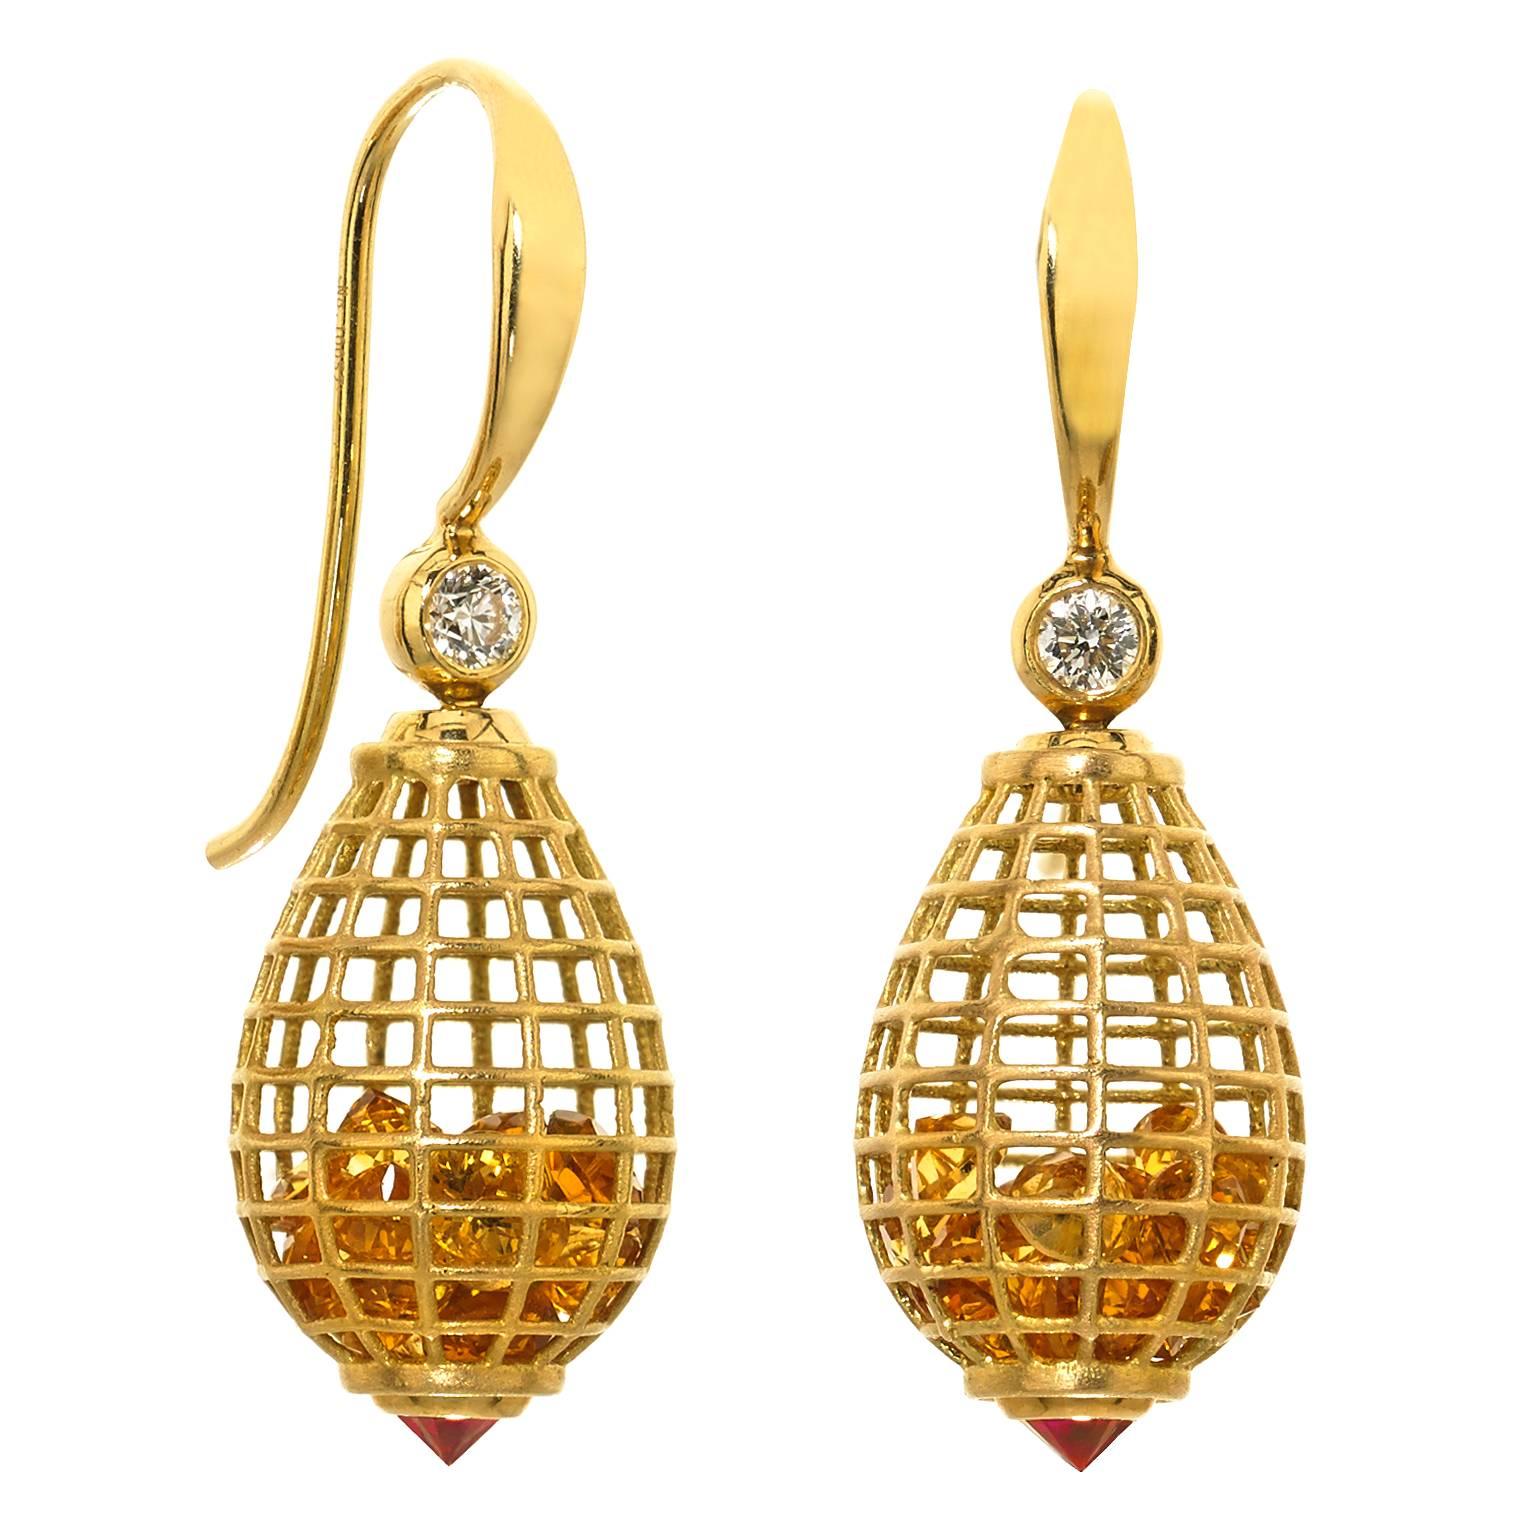 Shaker Teardrop Earrings in polished and matte-finished 18k yellow gold with 4.69 carats of loose honey citrine accented with round brilliant-cut white diamonds totaling 0.12 carats and inverted ruby caps totaling 0.27 carats.